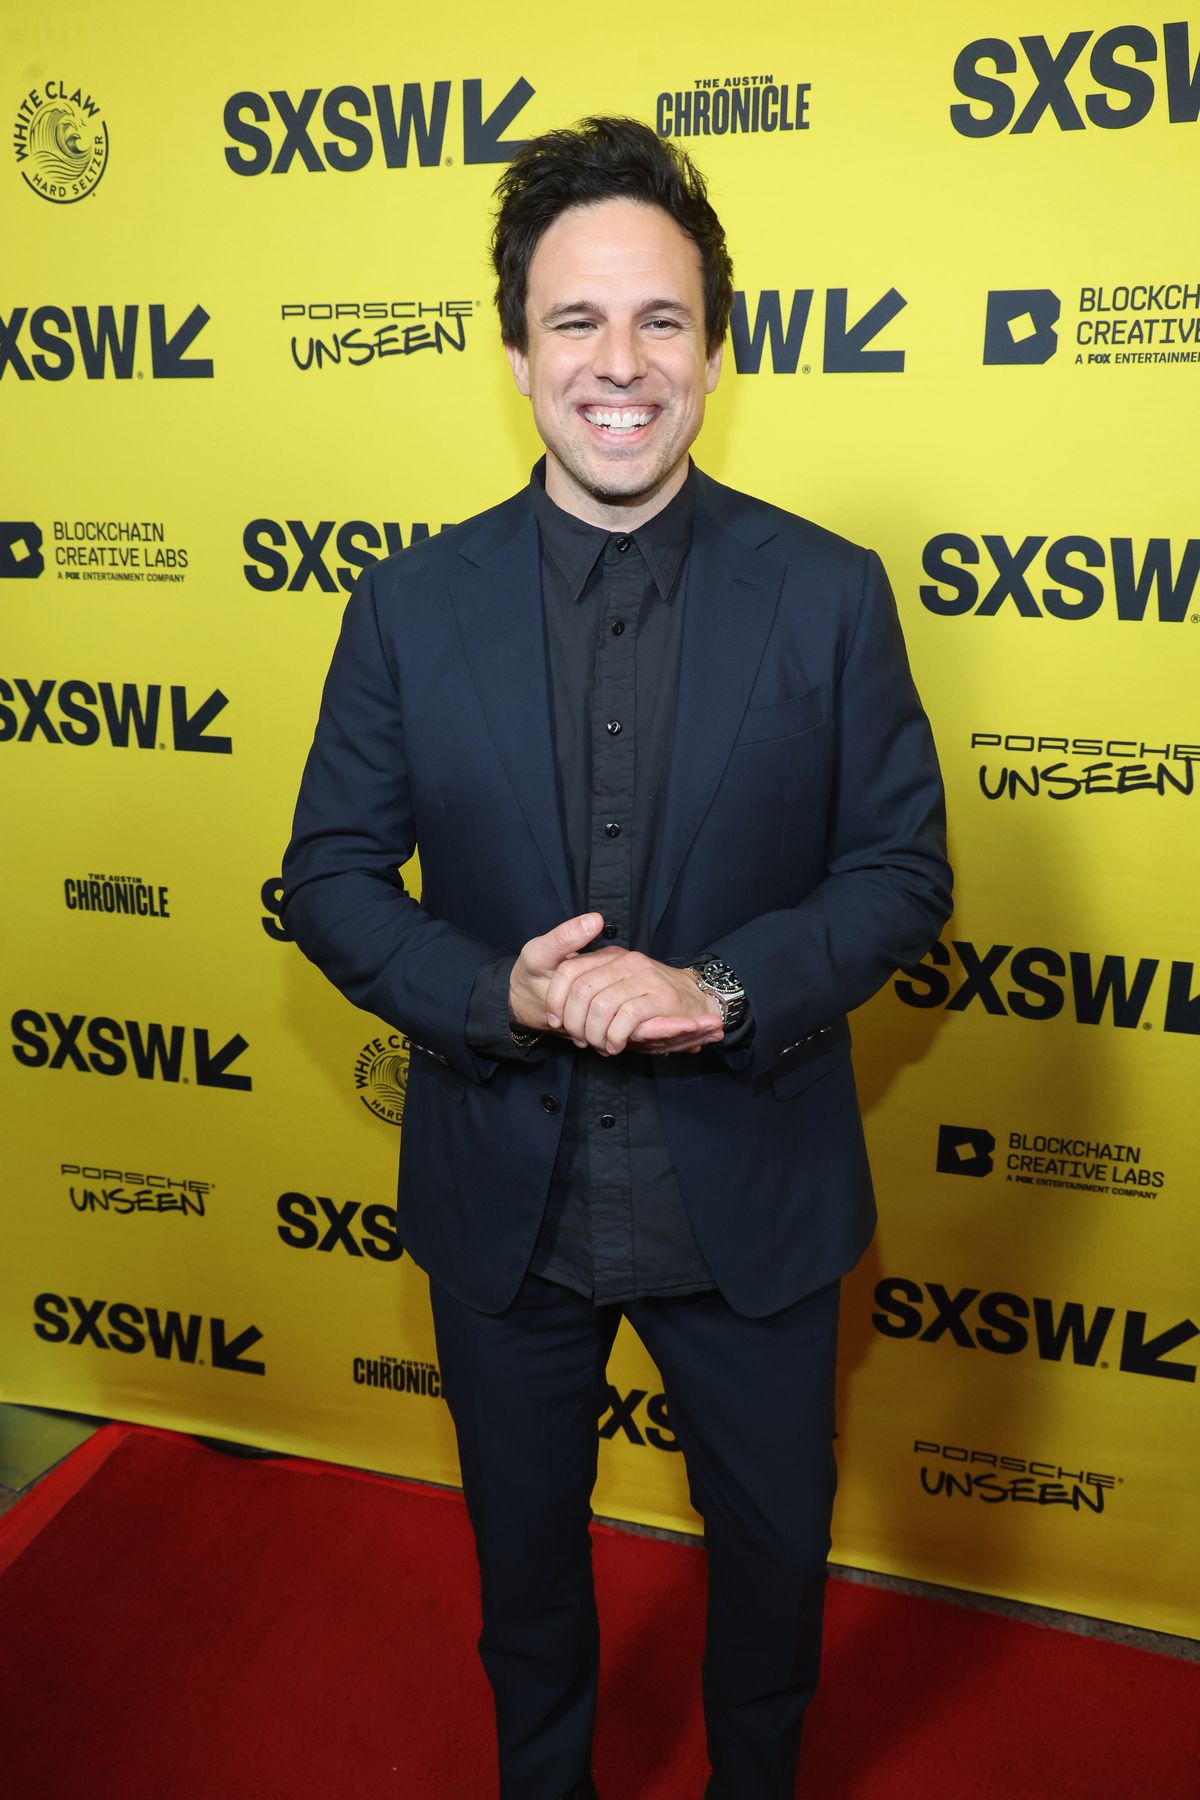 Director Tom Gormican attends the premiere of his film “The Unbearable Weight of Massive Talent” at South by Southwest in Austin, Texas, on March 12, 2022.  (Gary Miller/Getty Images)